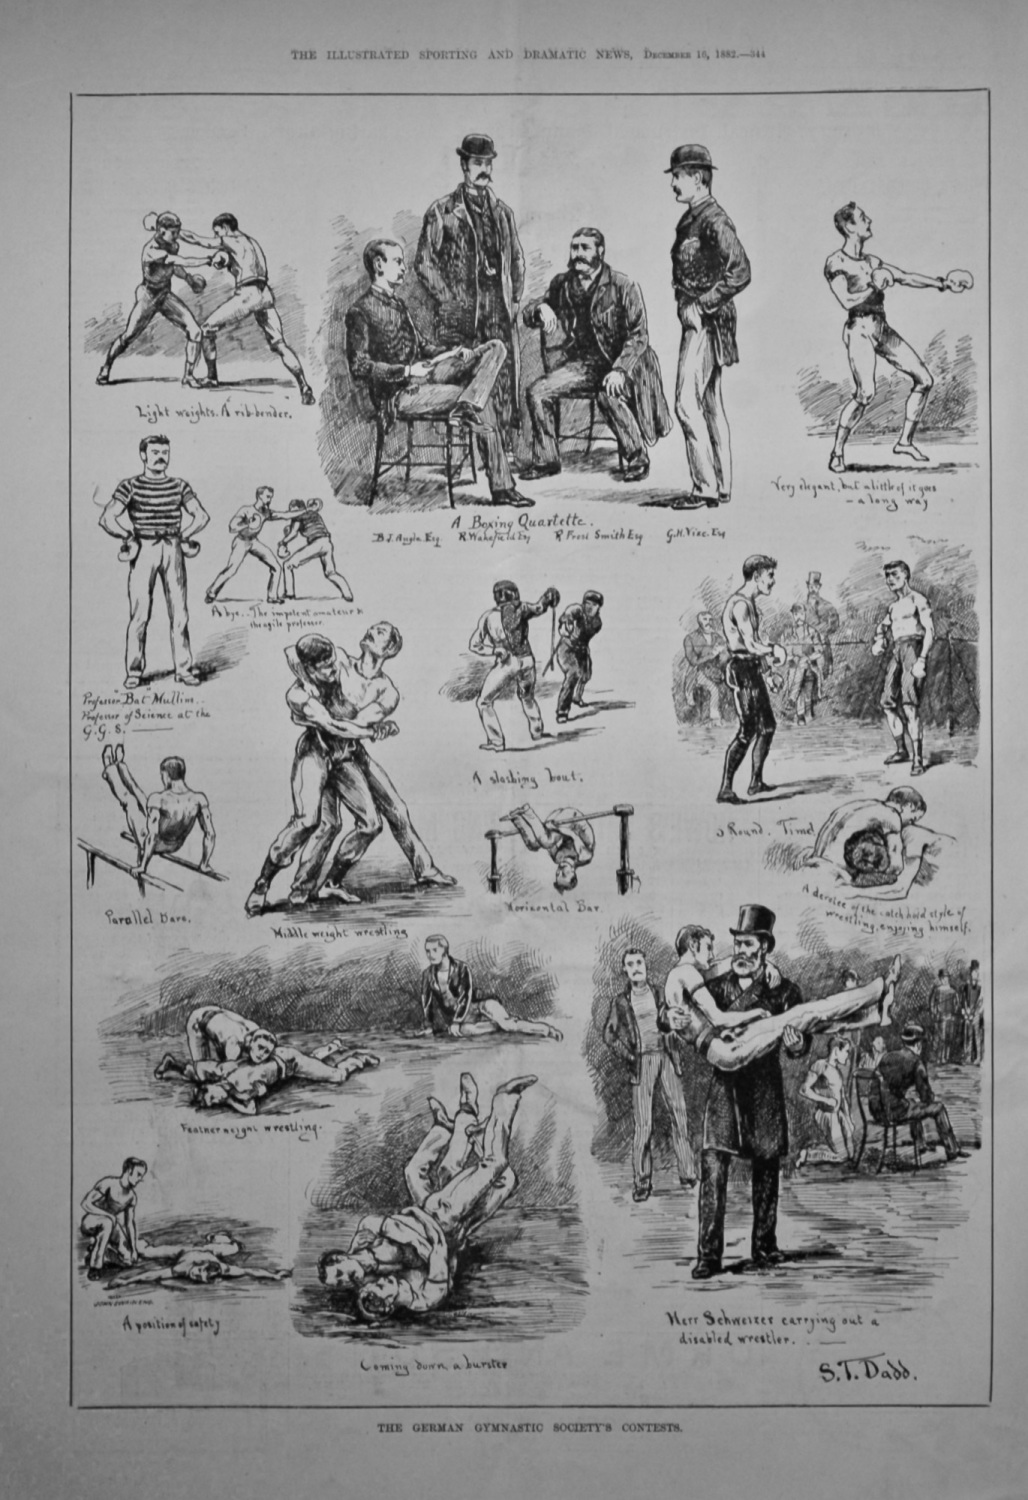 The German Gymnastic Society's Contests.  1882.